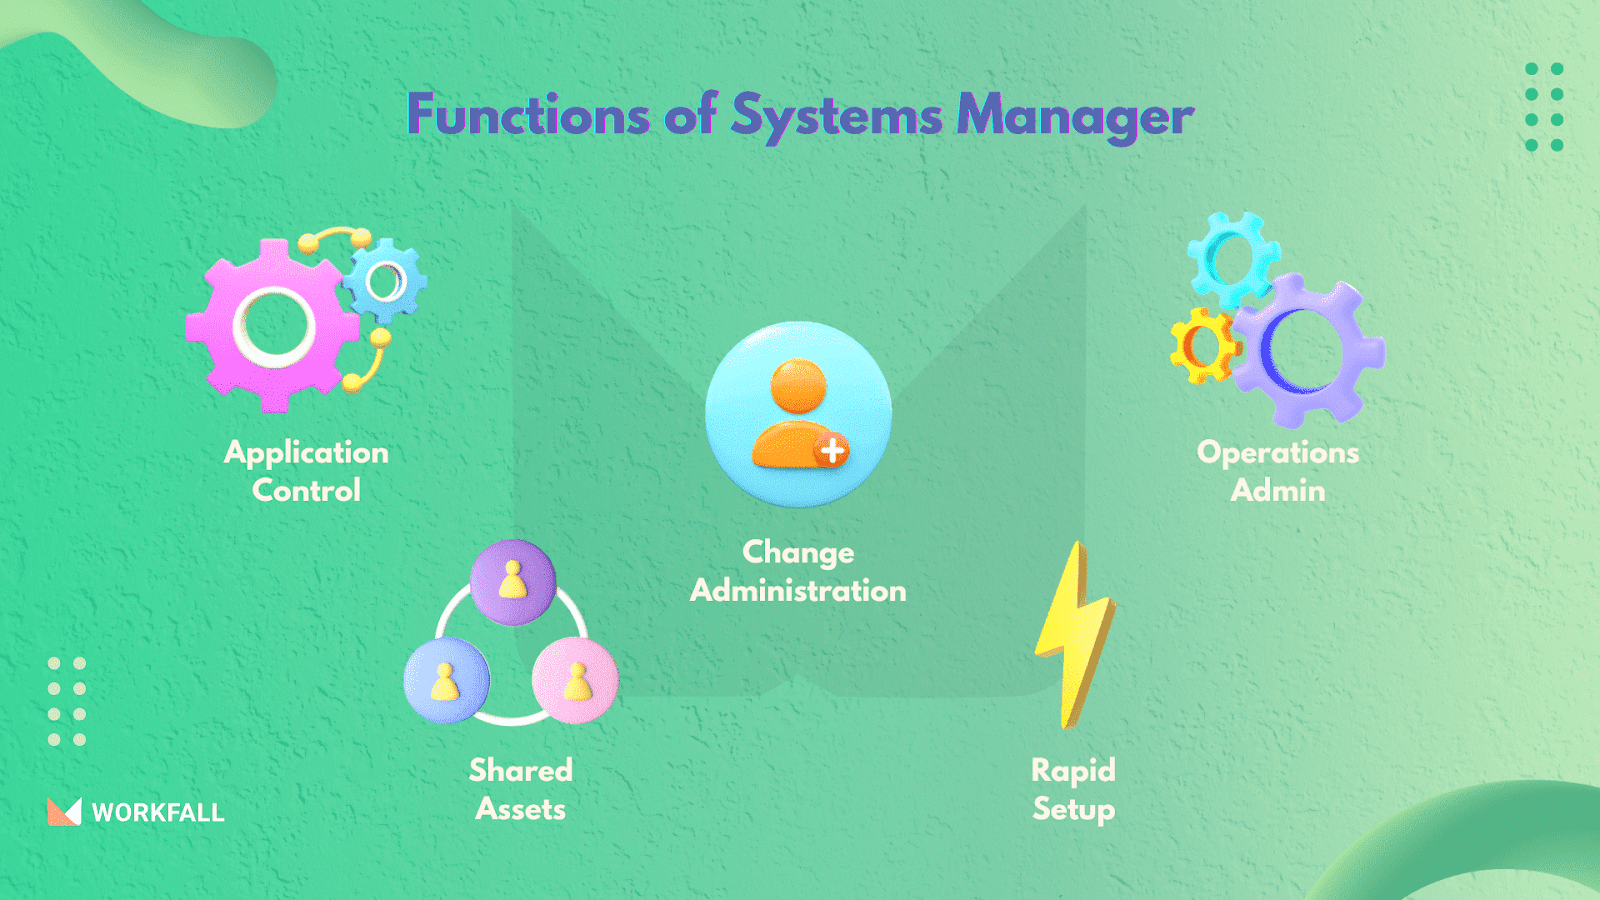 Functions of Systems Manager in AWS Elastic Beanstalk